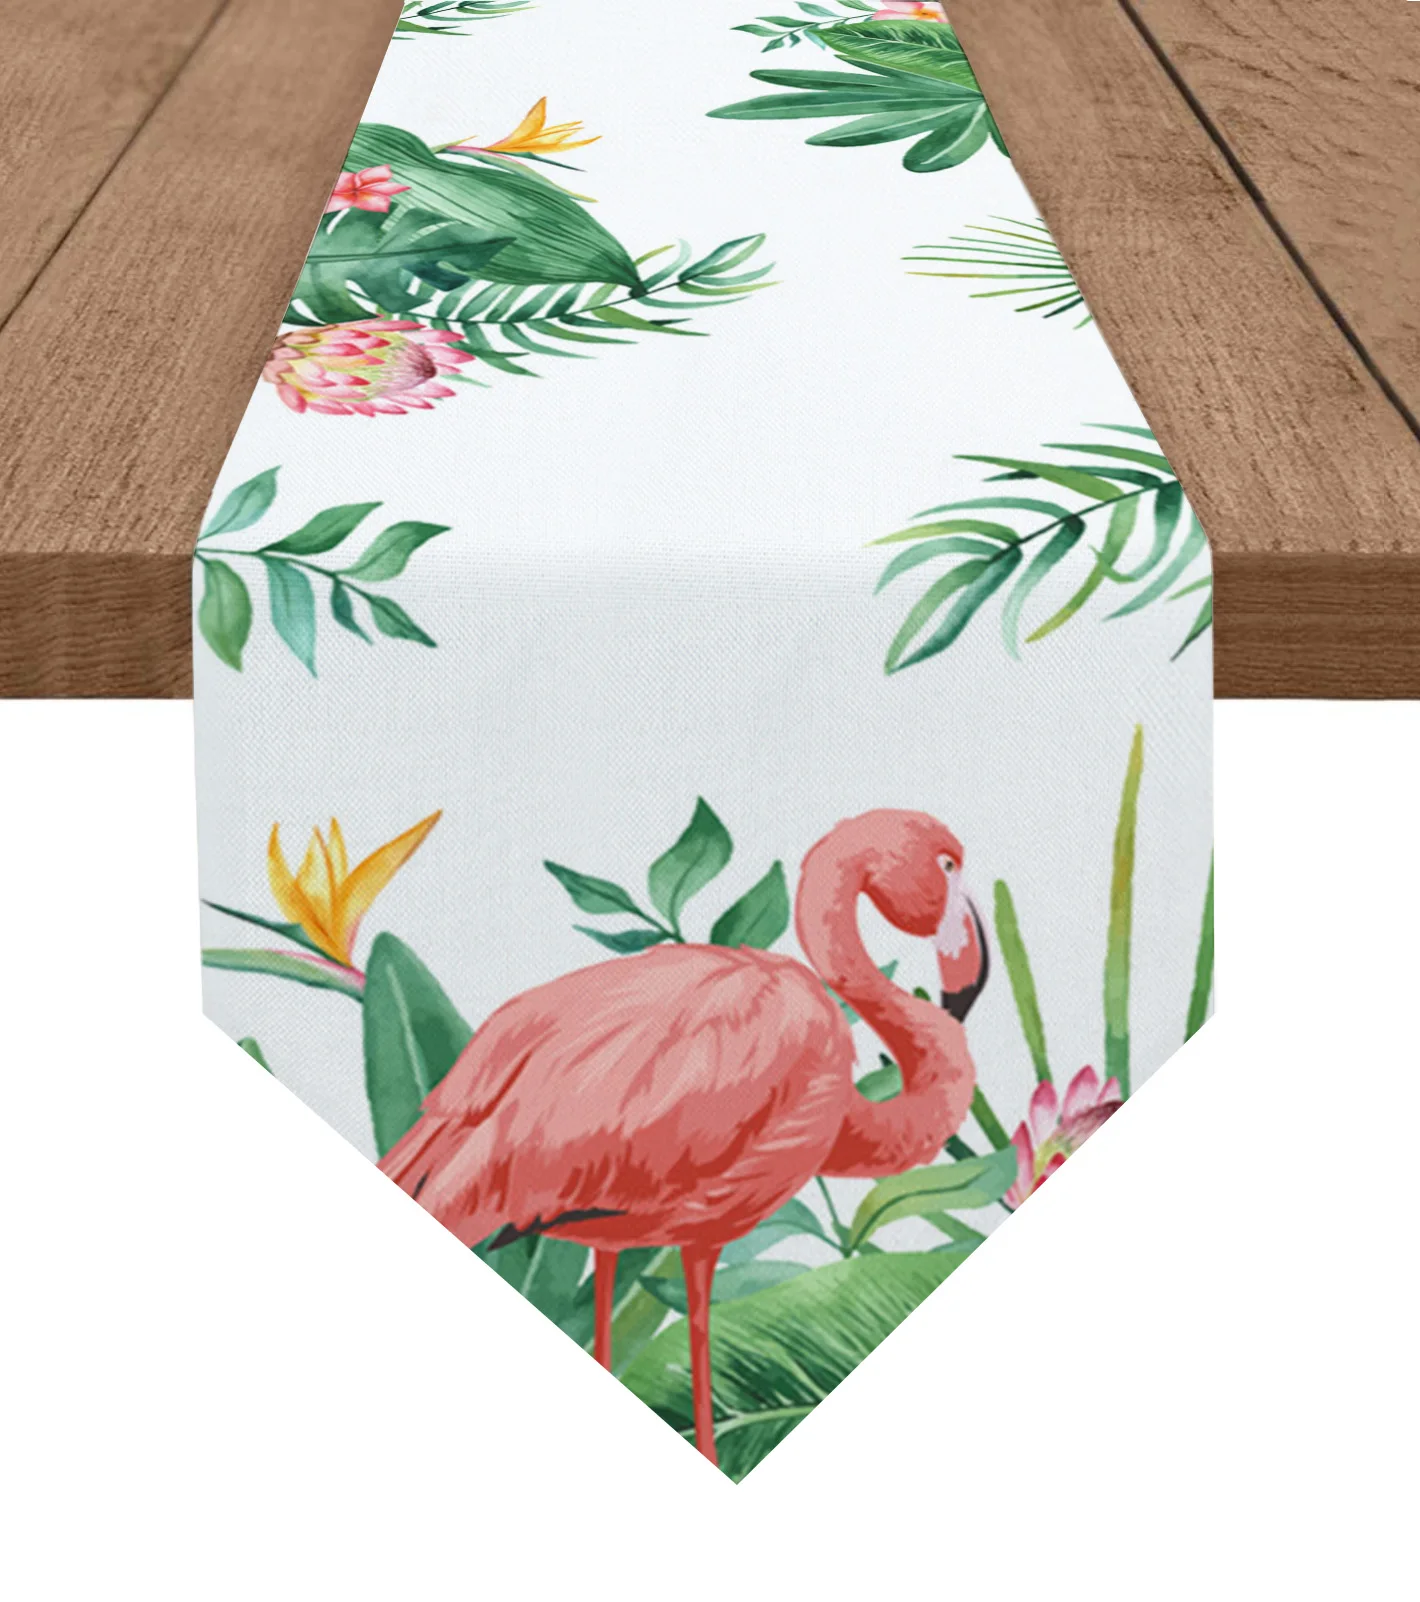 

Tropical Plants Flamingos Palm Leaves Table Runner Wedding Decor Tablecloth Holiday Party Home Dining Table Decoration